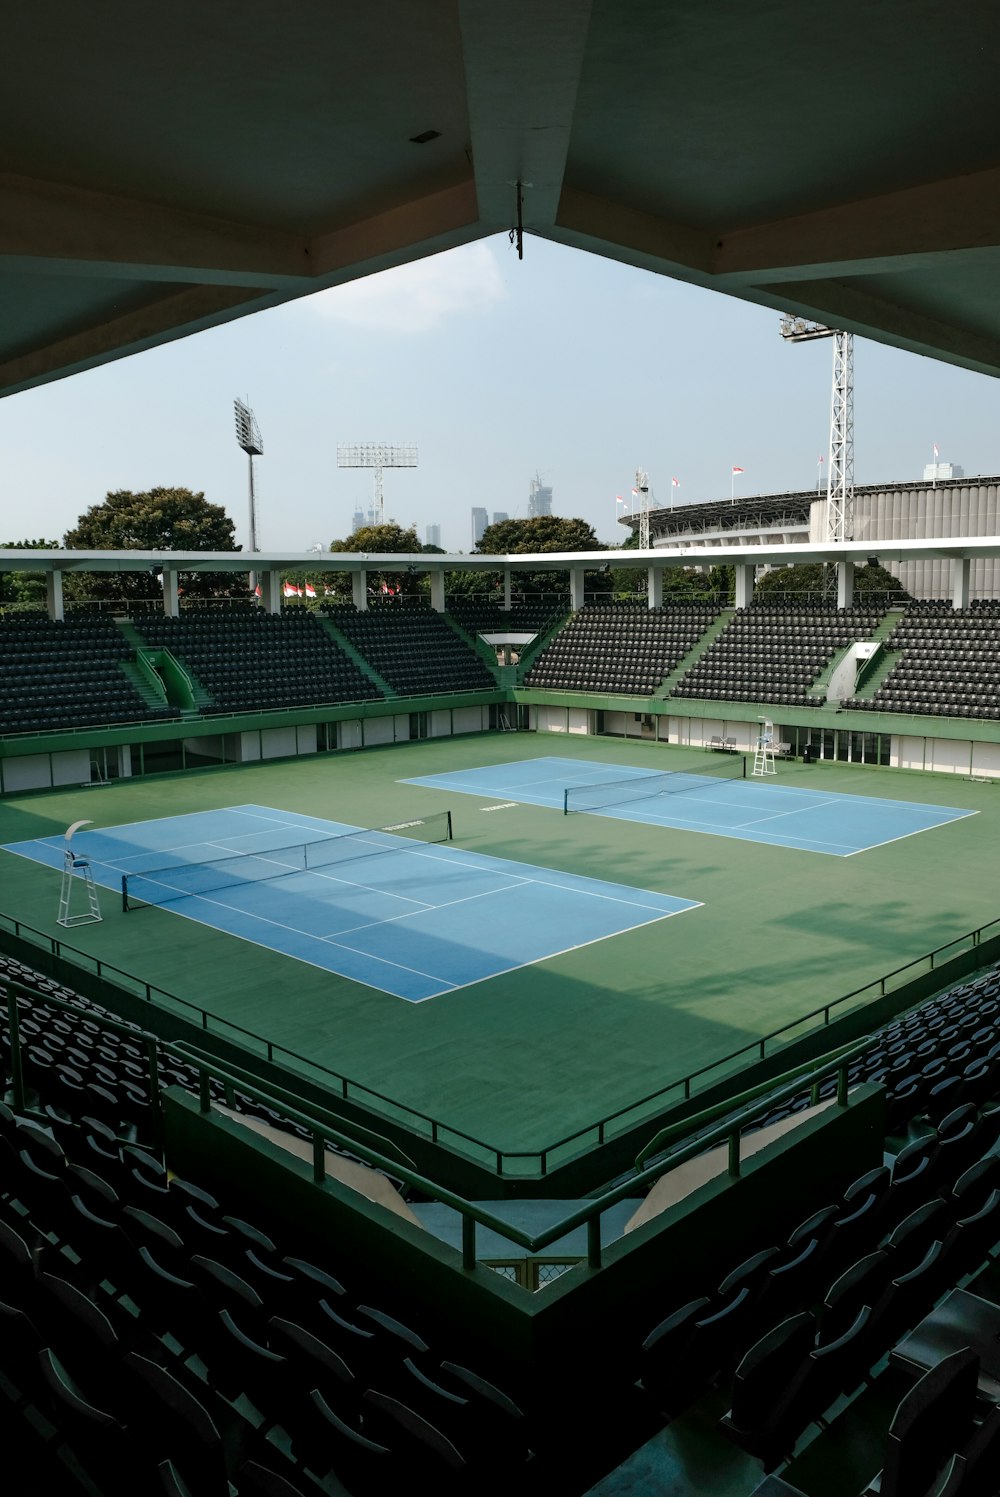 an empty tennis court with a view of the stands